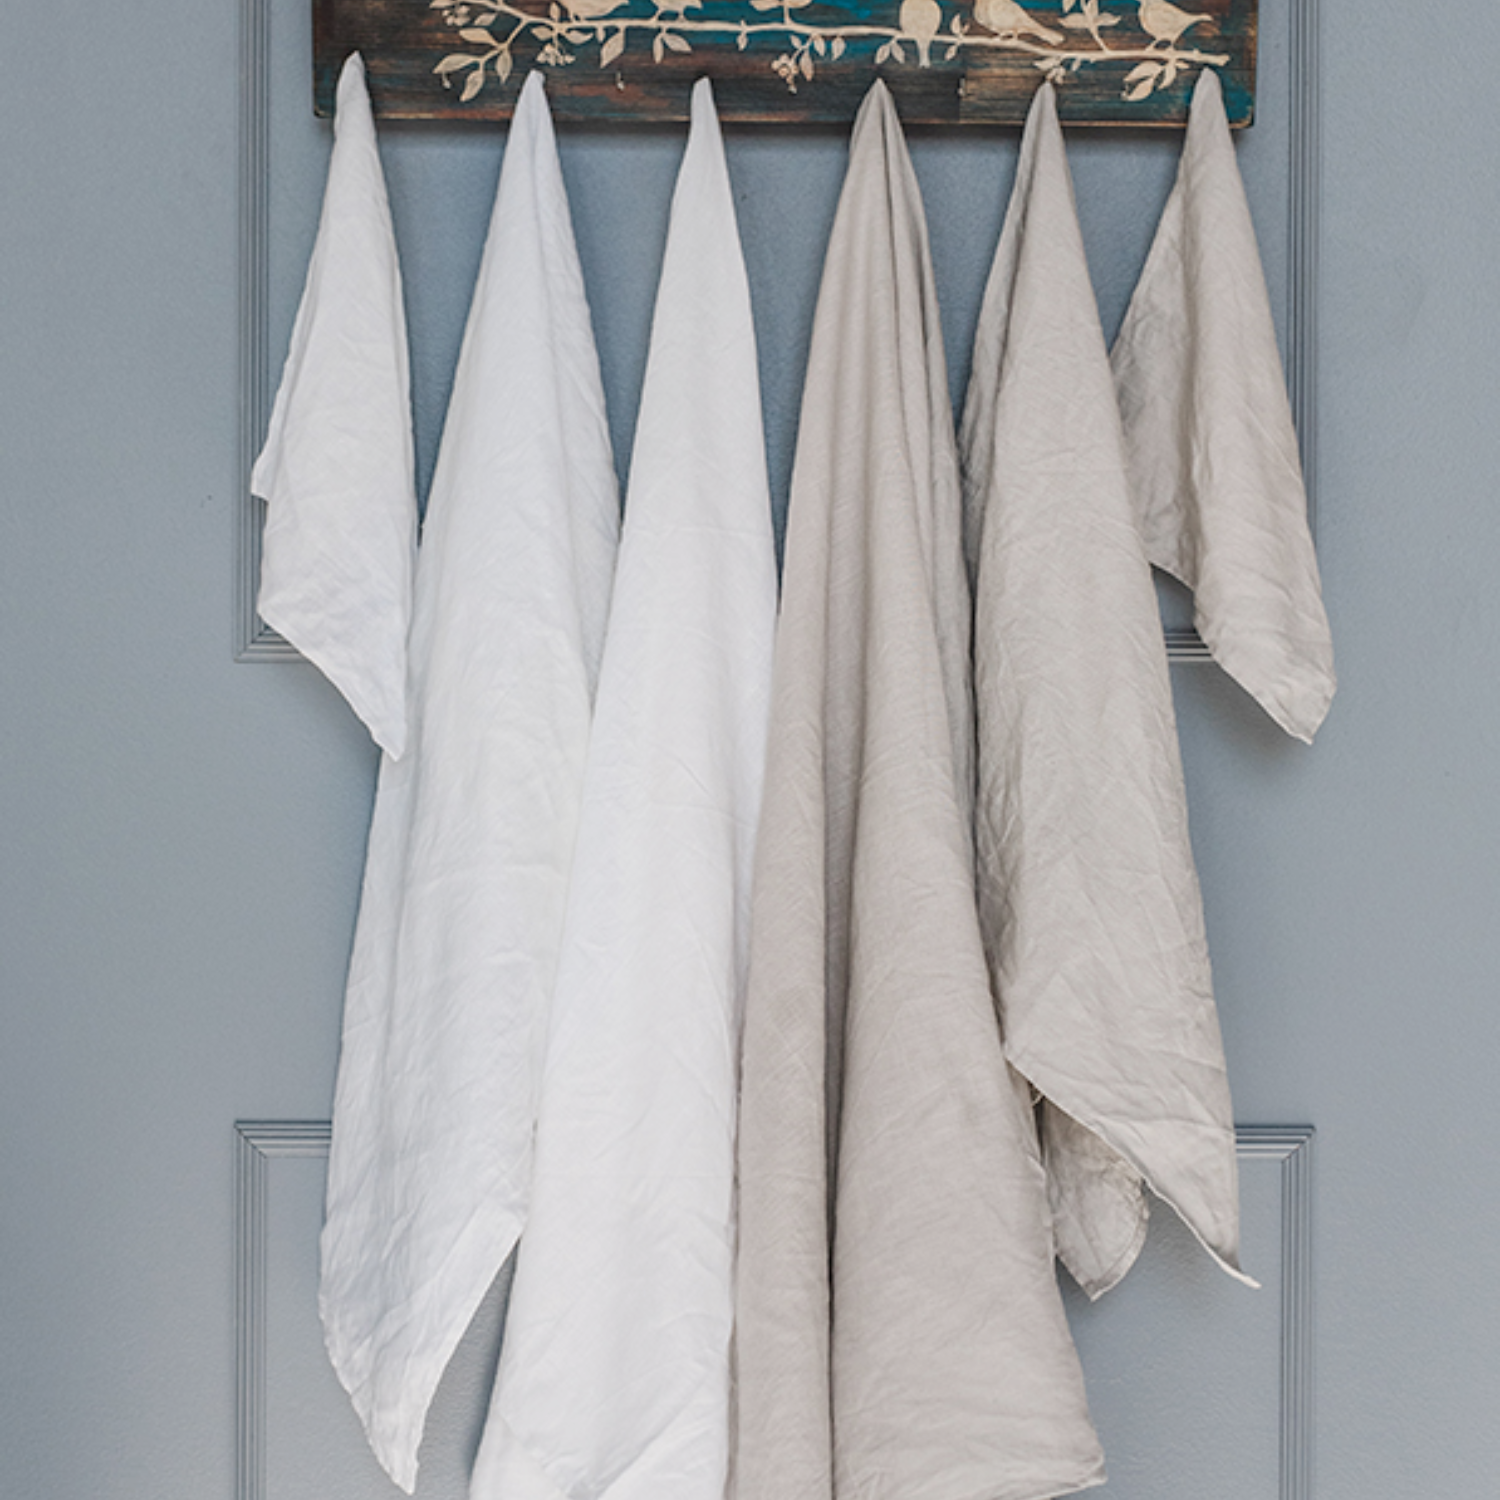 Hanging pure linen bath towels in white and natural colors.